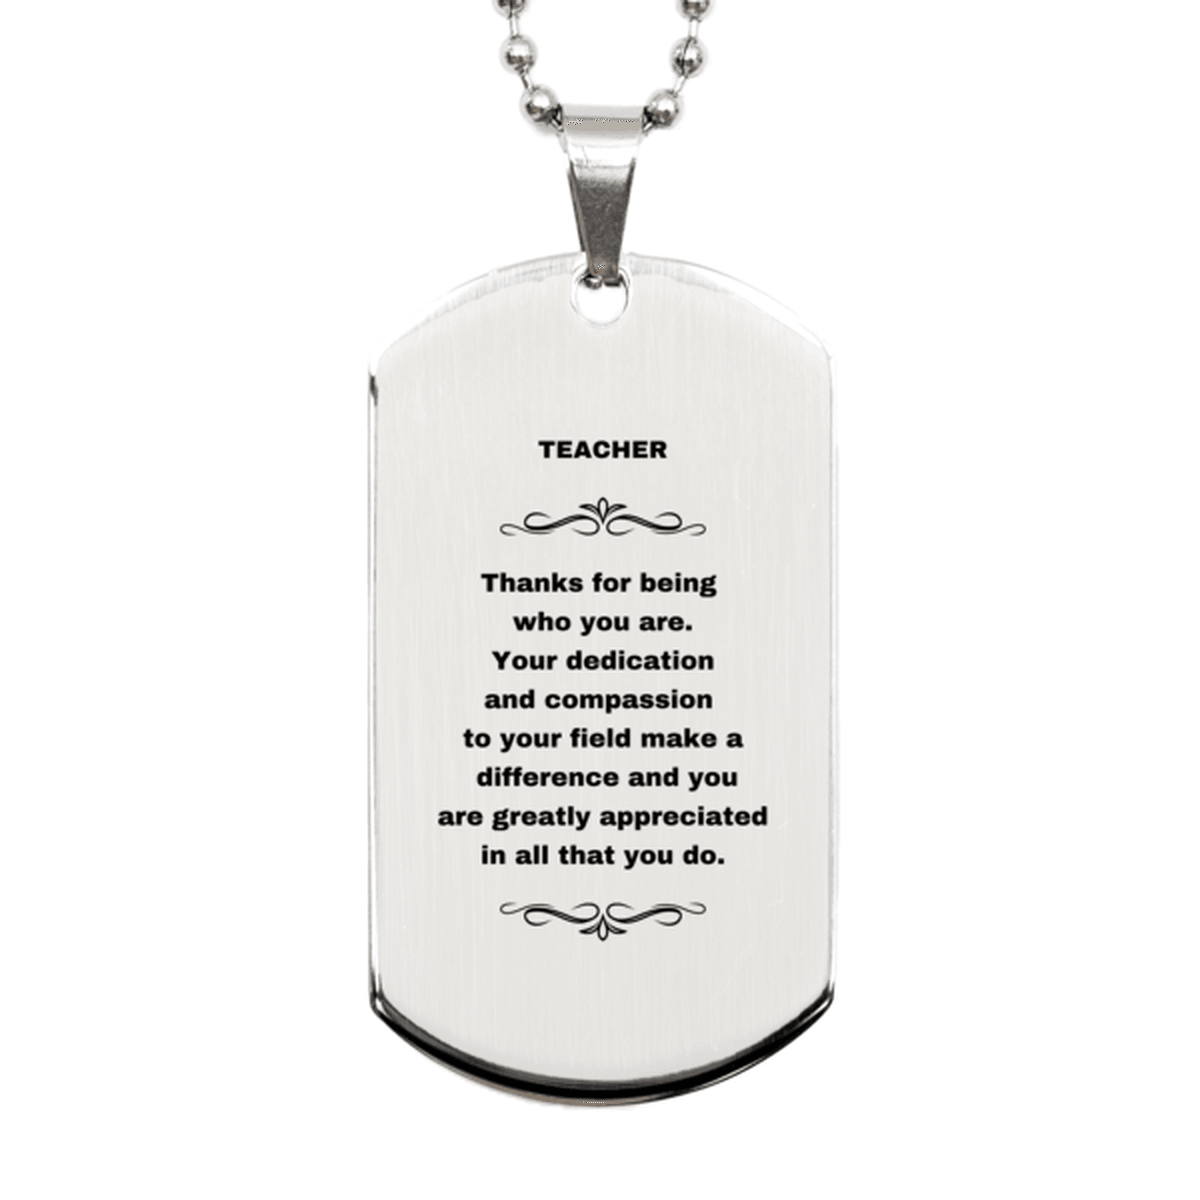 Teacher Silver Engraved Dog Tag Necklace - Thanks for being who you are - Birthday Christmas Jewelry Gifts Coworkers Colleague Boss - Mallard Moon Gift Shop